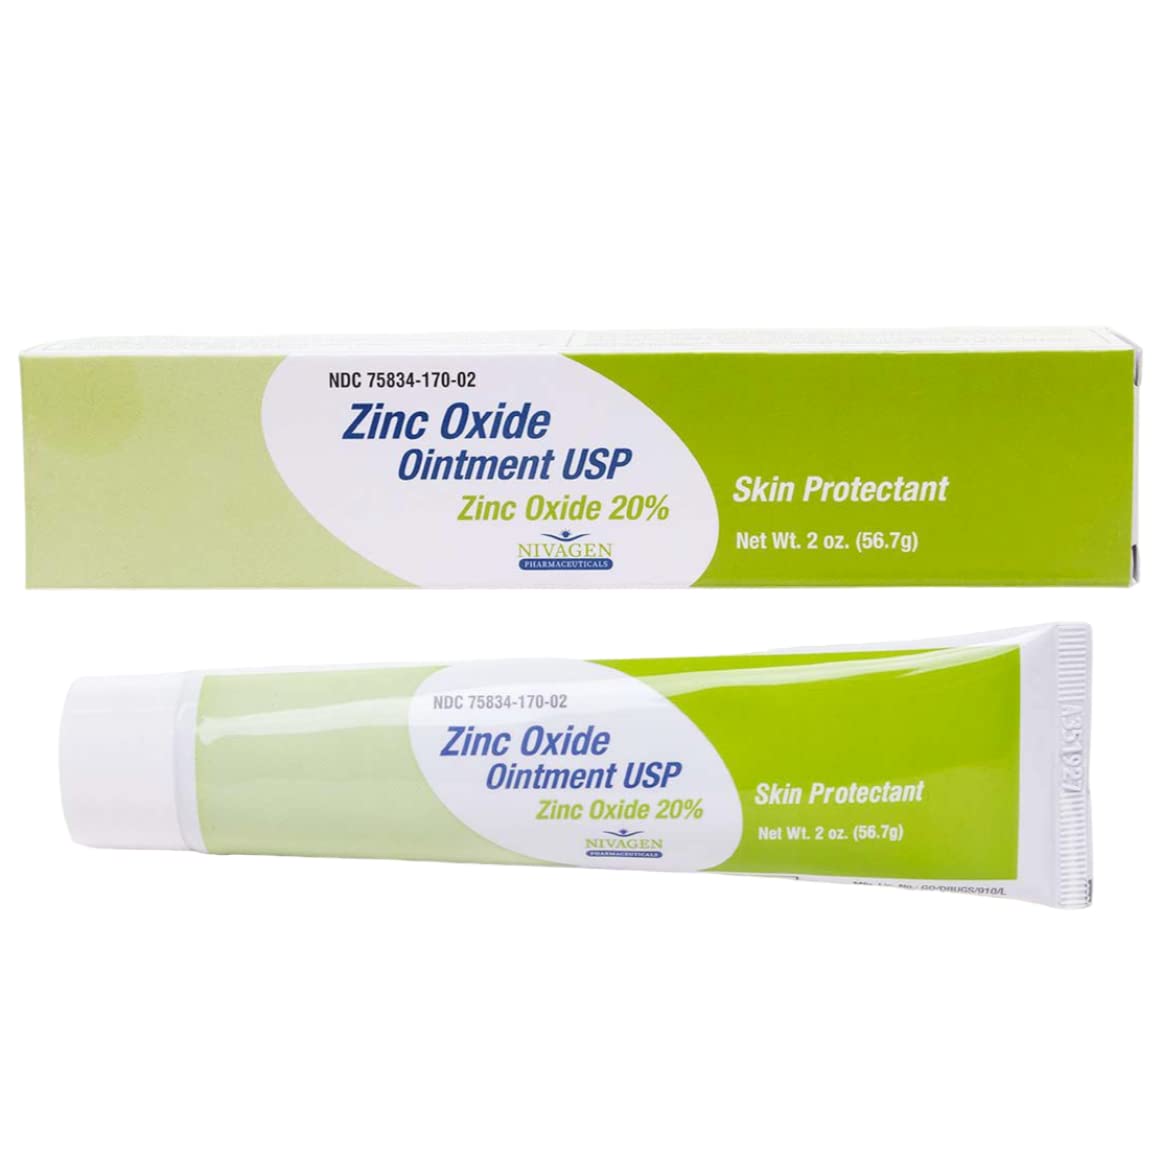 Nivagen Zinc Oxide Ointment USP 20% | For Diaper Rash, Chafed Skin, Protects From Wetness, Relief From Poison Ivy, Poison Oak, & Poison Sumac | 2oz Tube Of Zinc Oxide : Baby